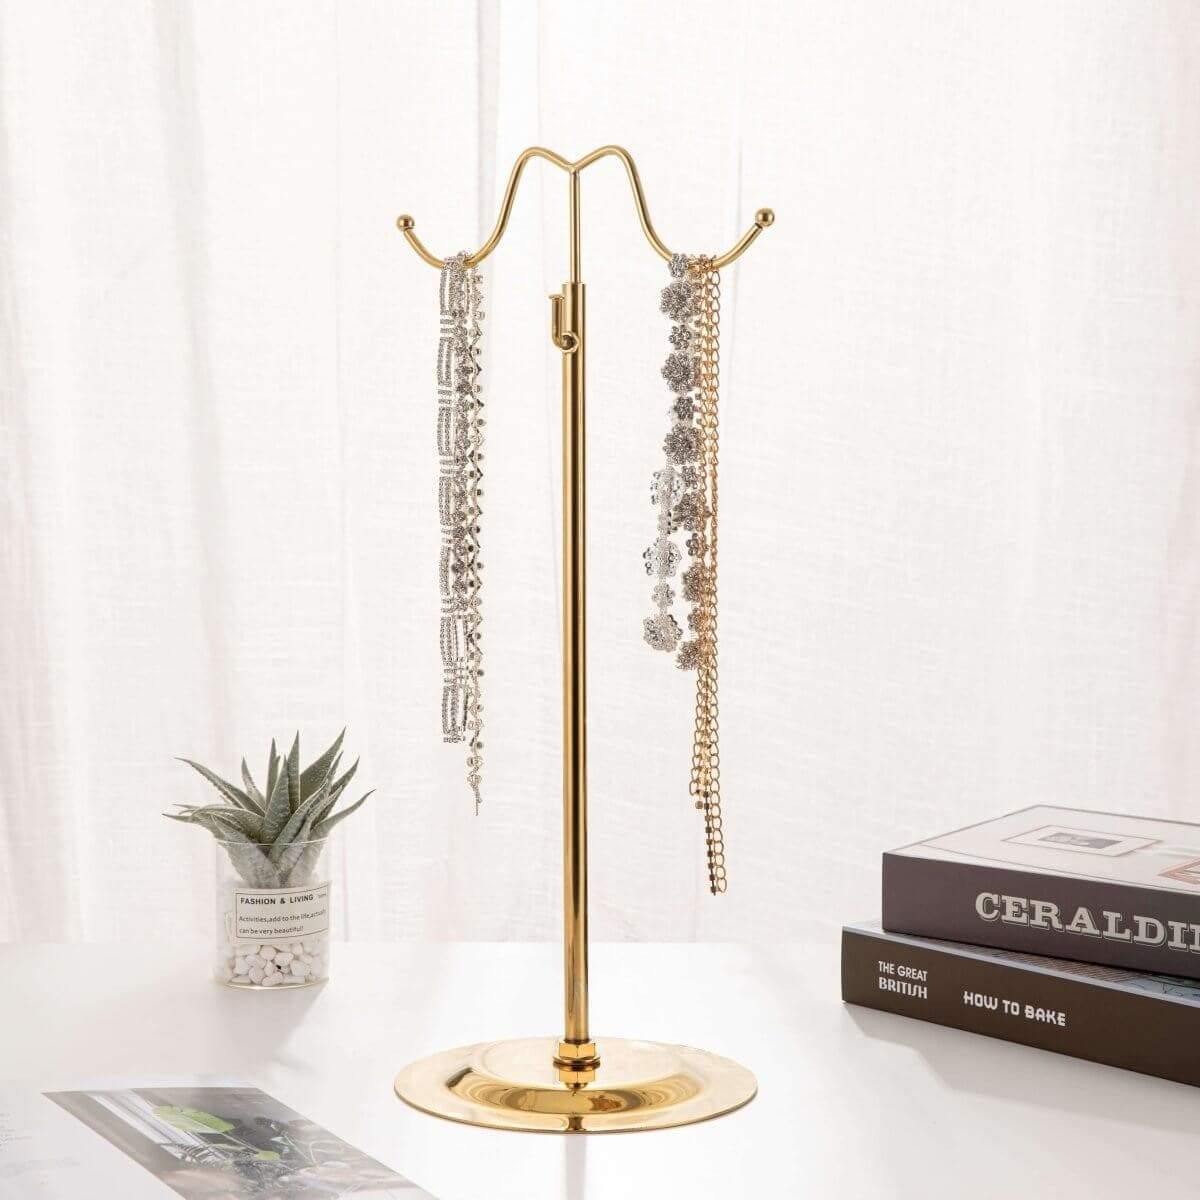 Handbag Display Stand Necklace Display Stand Purse Display Stand Adjustable Height Double Hook Handbag Display Stand YIFU DISPLAY